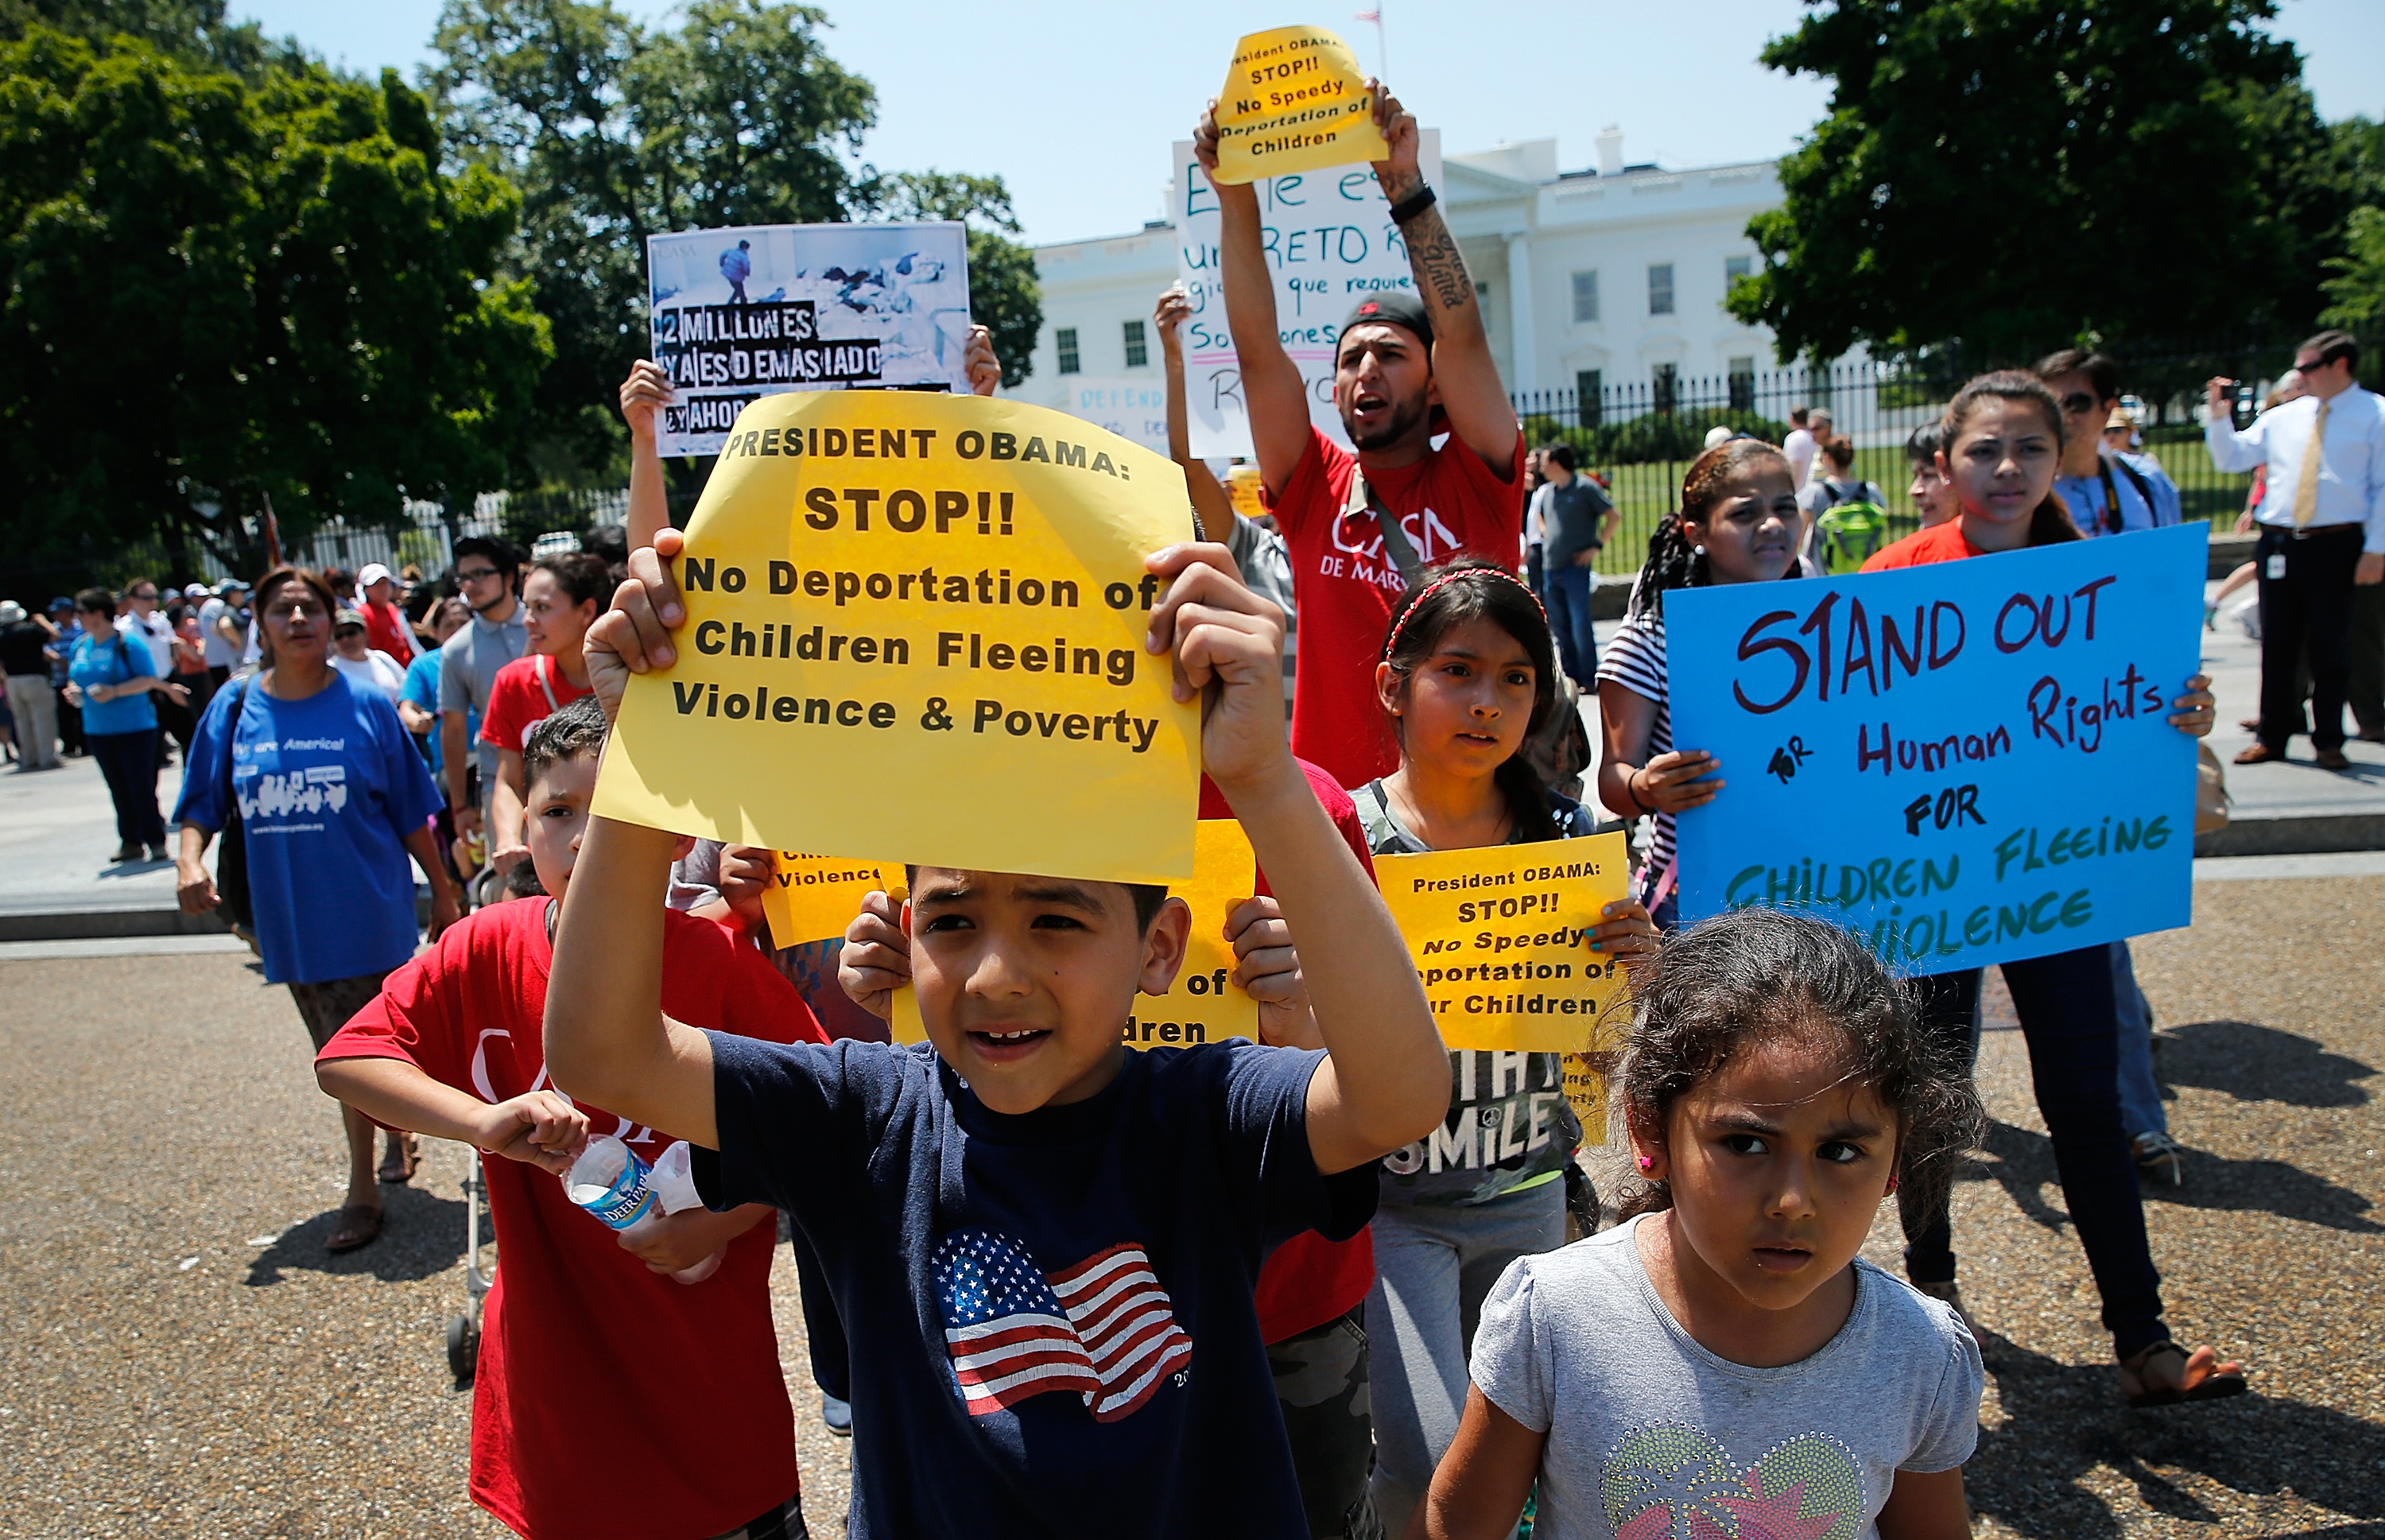 Immigrants And Activists Protest Obama Response To Child Immigration Crisis